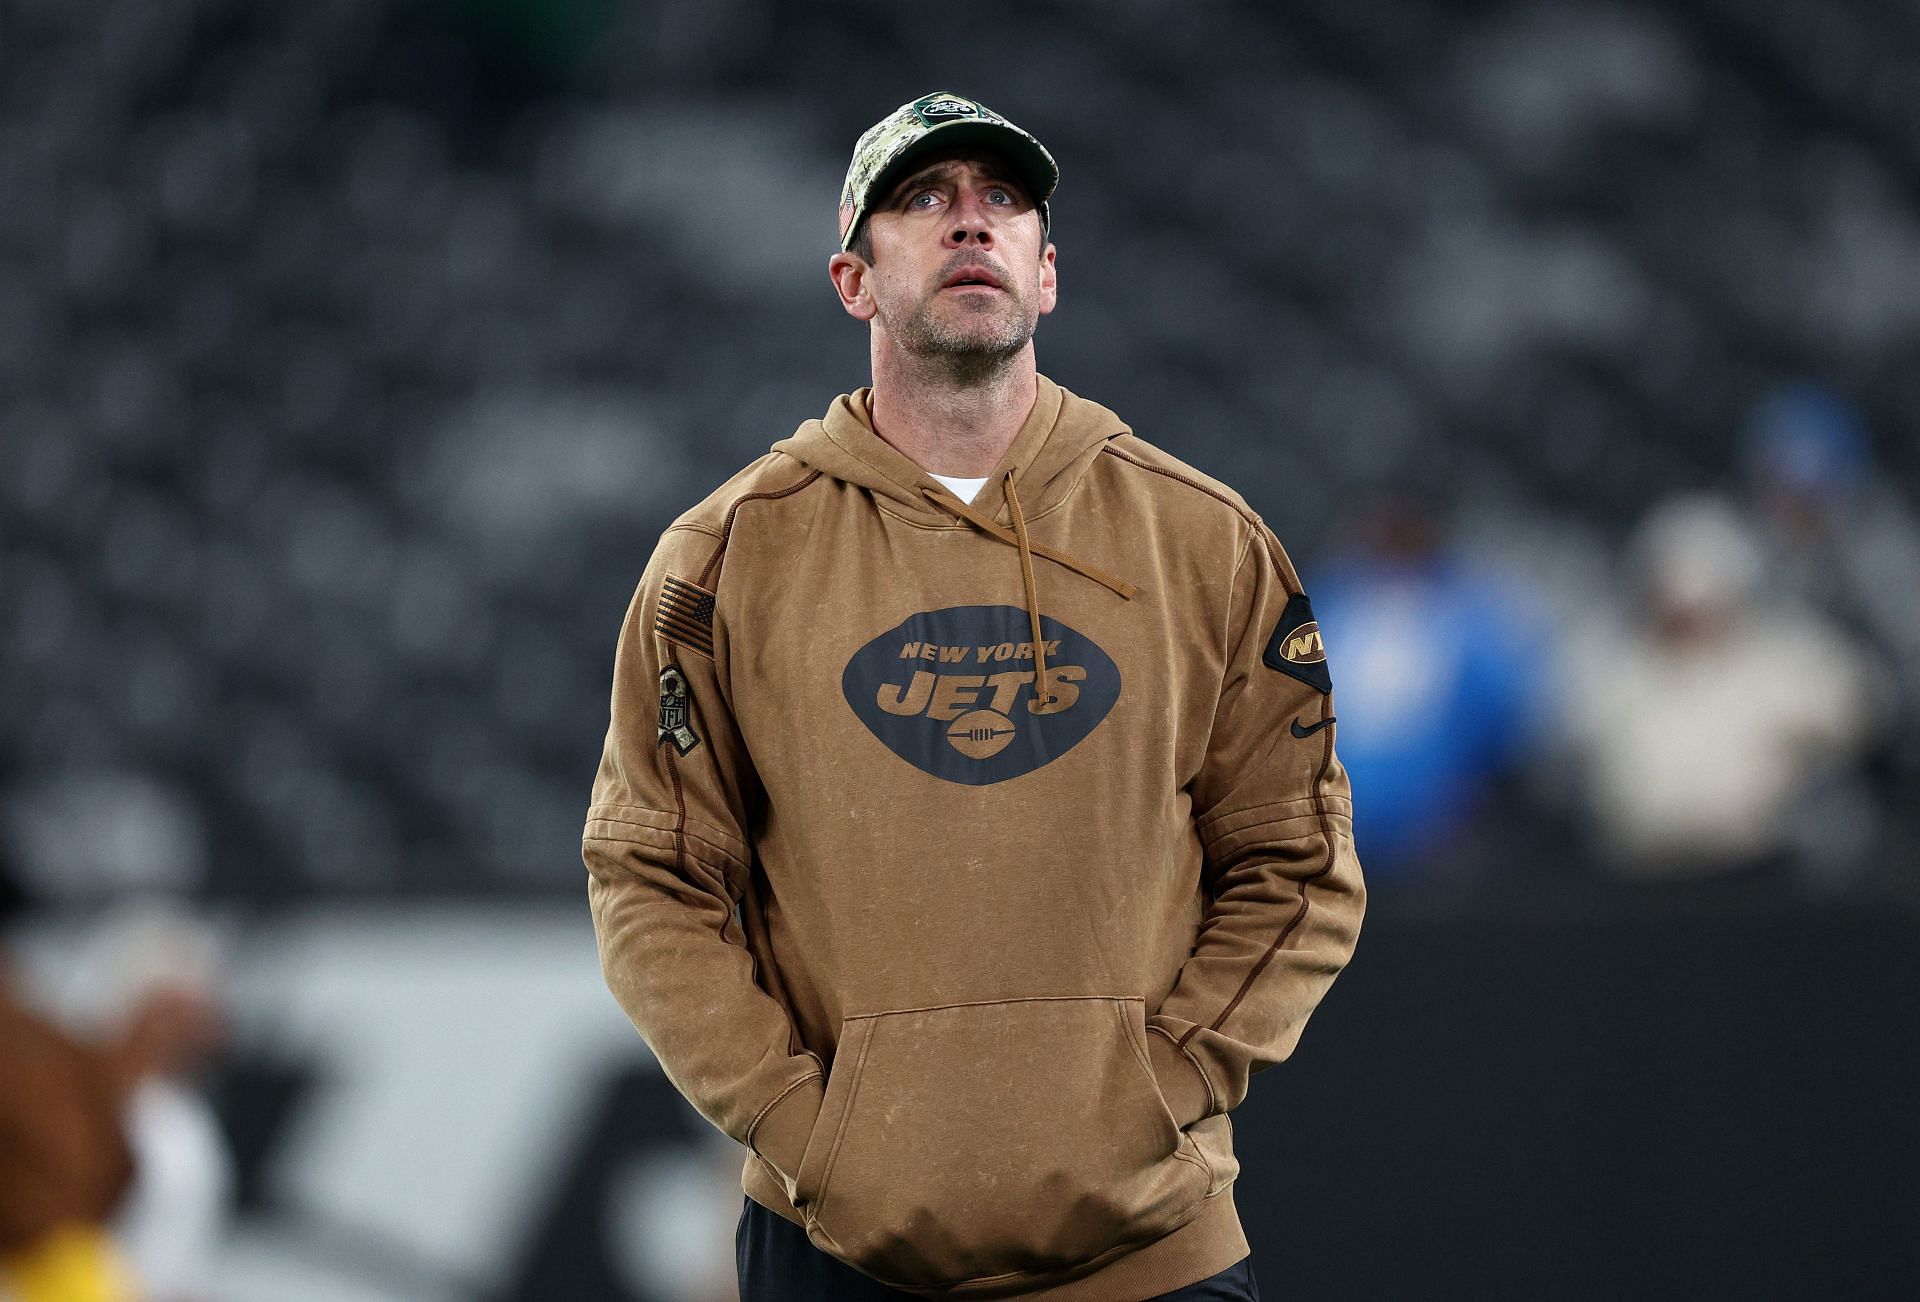 Aaron Rodgers: Los Angeles Chargers v New York Jets